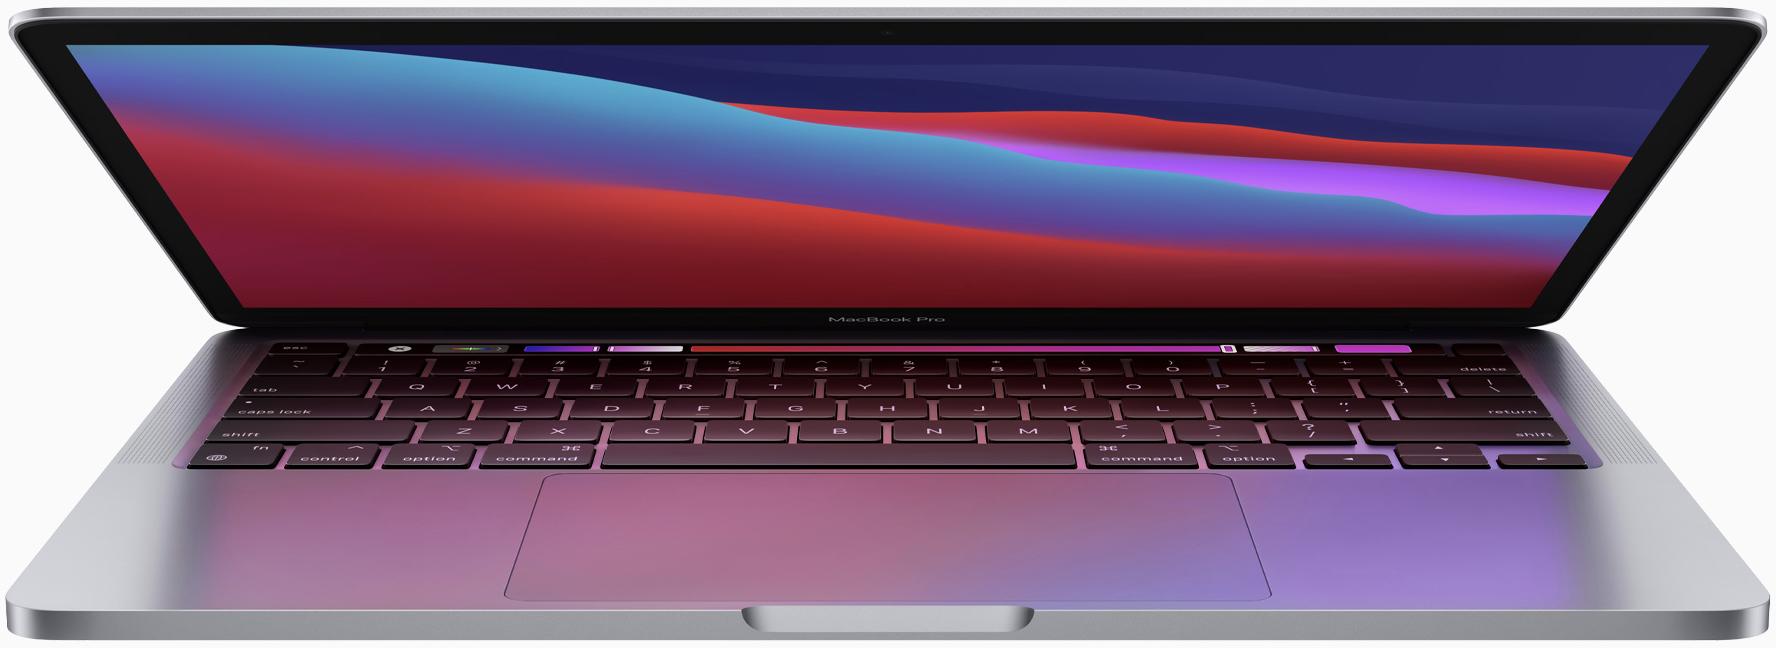 Macbook Pro 2020 13 Inch Silicon Render Cropped